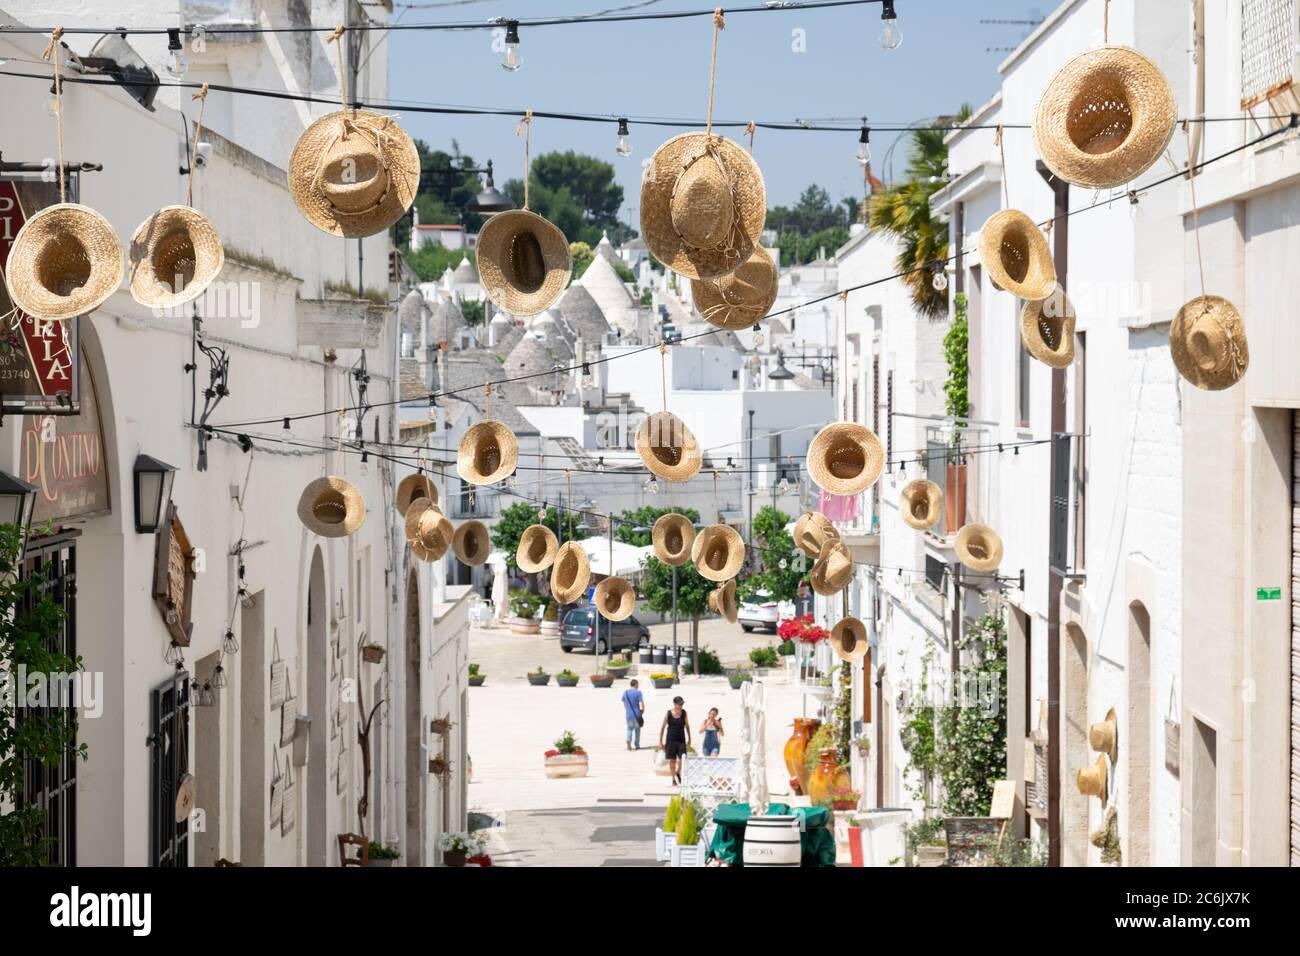 Puglia, South Italy - Alberobello, a special view of an artful installation of straw hats in a small street in the small Unesco town. Stock Photo